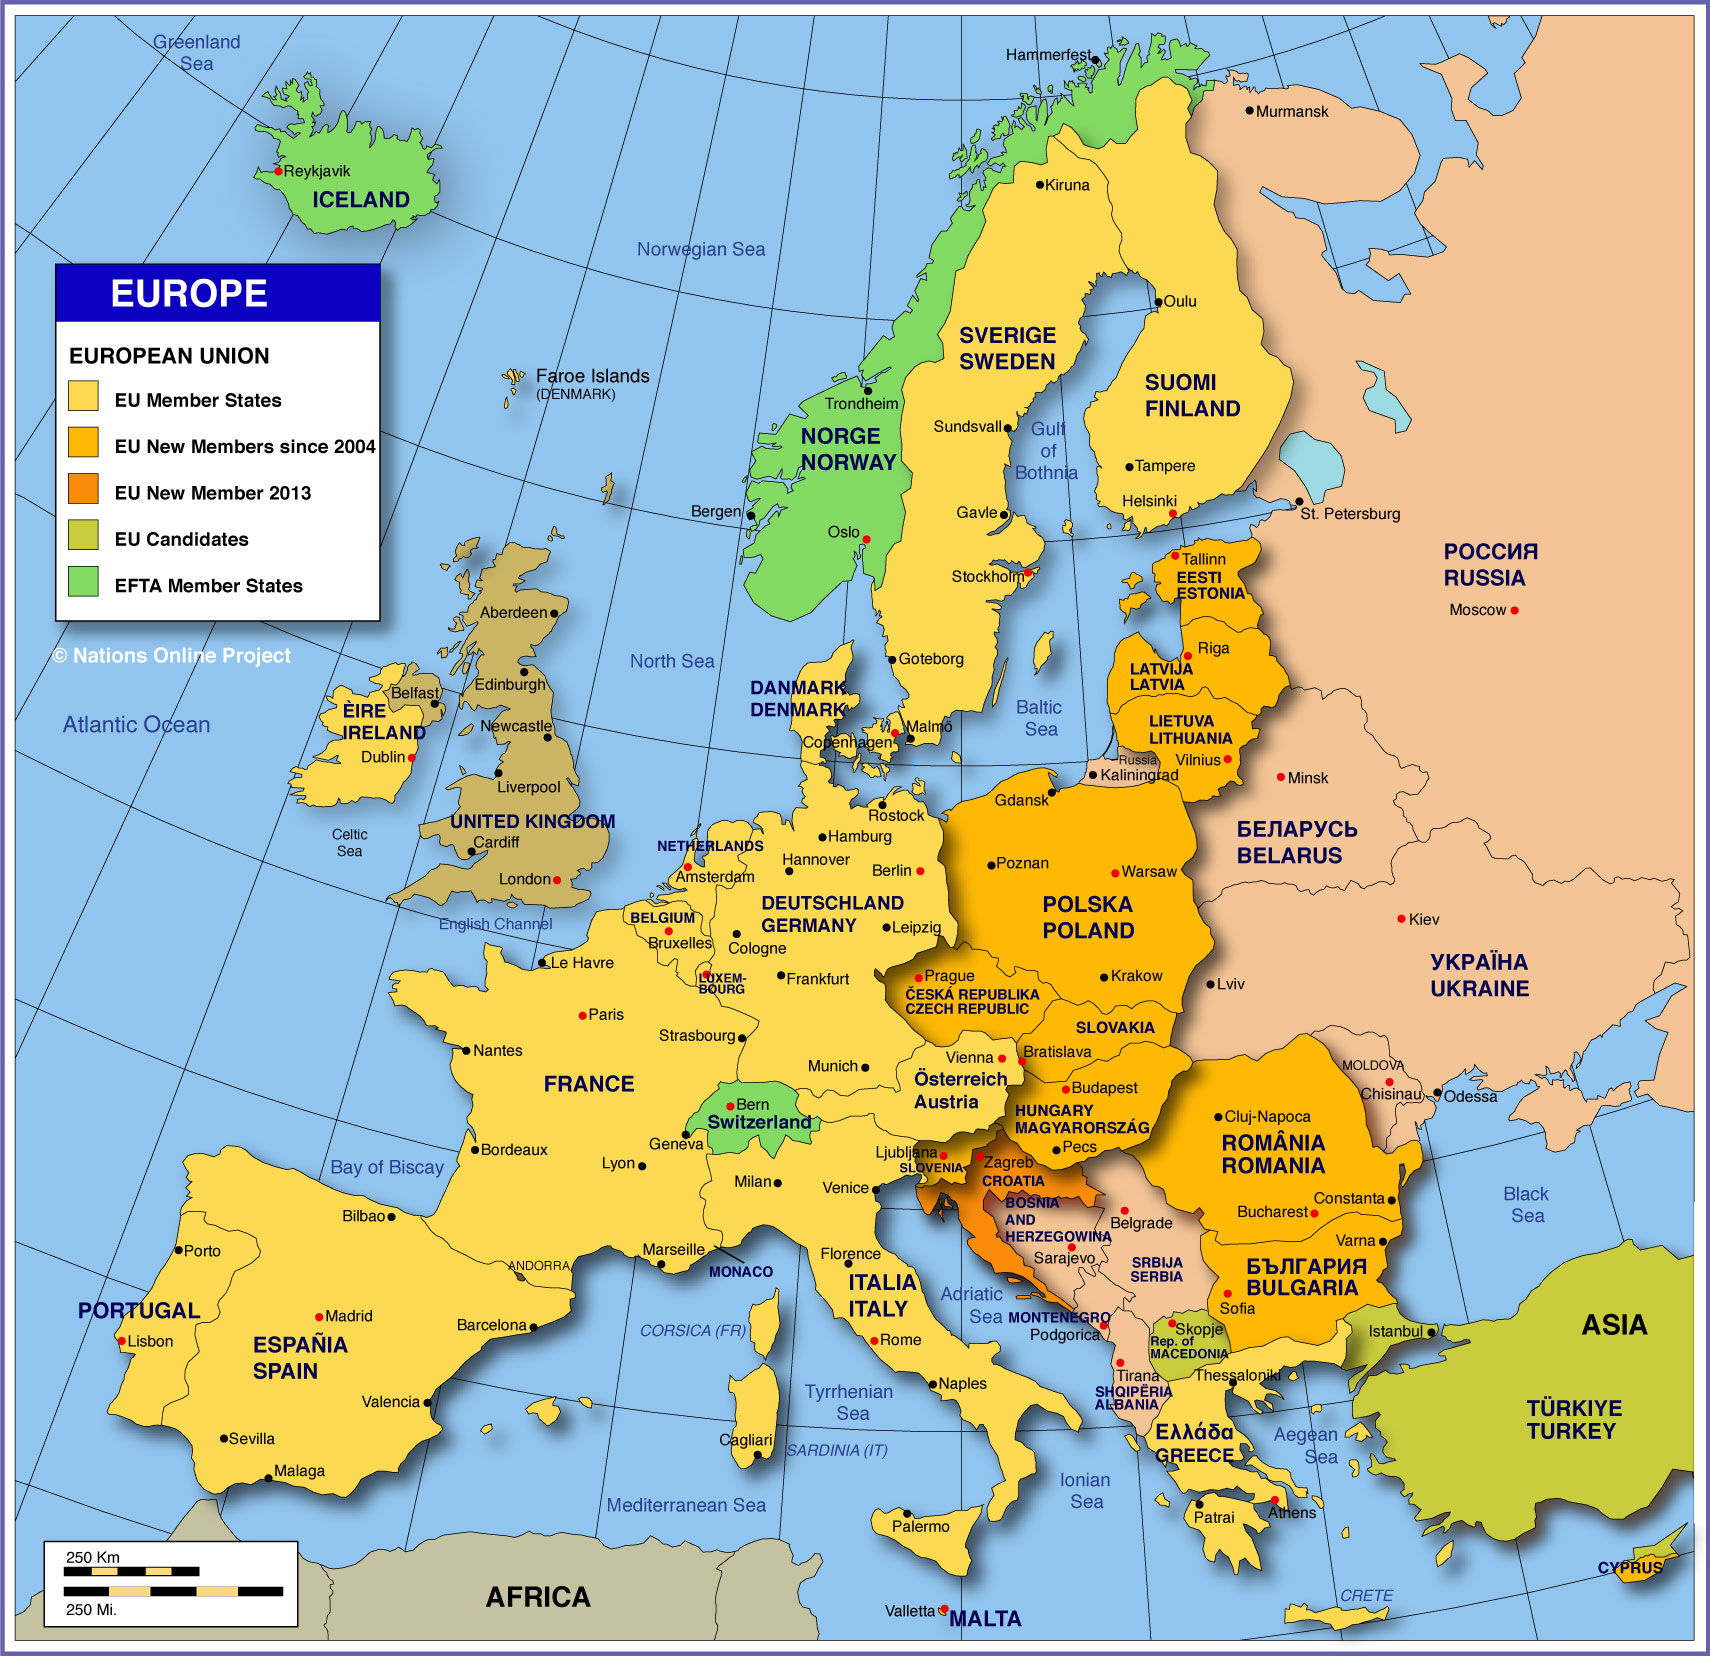 map of europe and russia with countries Map Of Europe Member States Of The Eu Nations Online Project map of europe and russia with countries